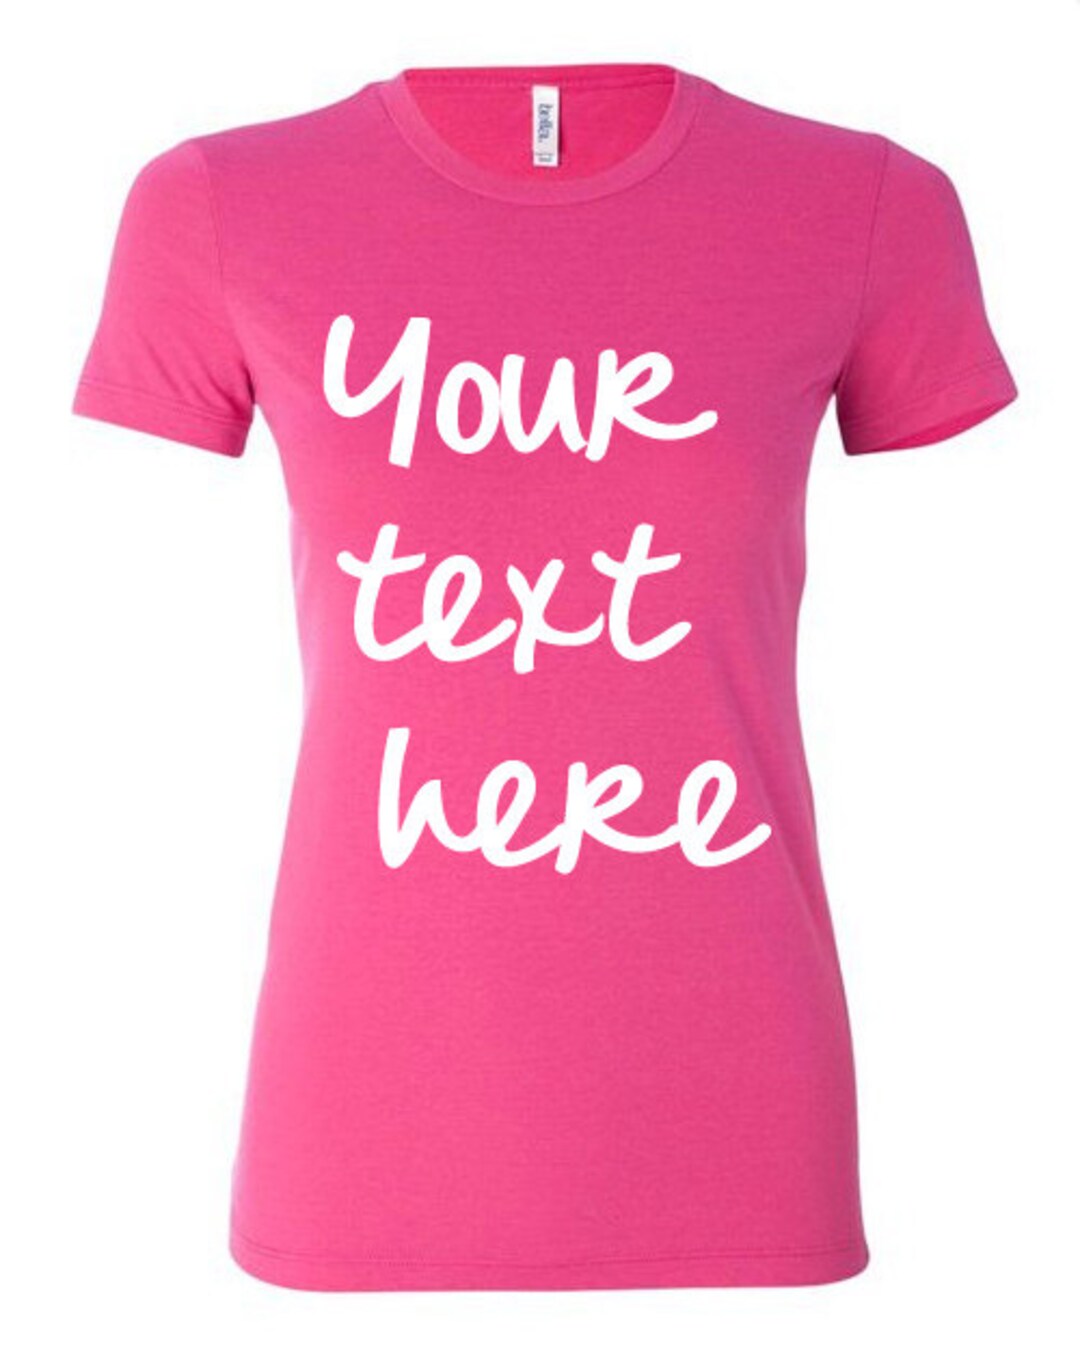 Create Your Own Wording Tees - Etsy